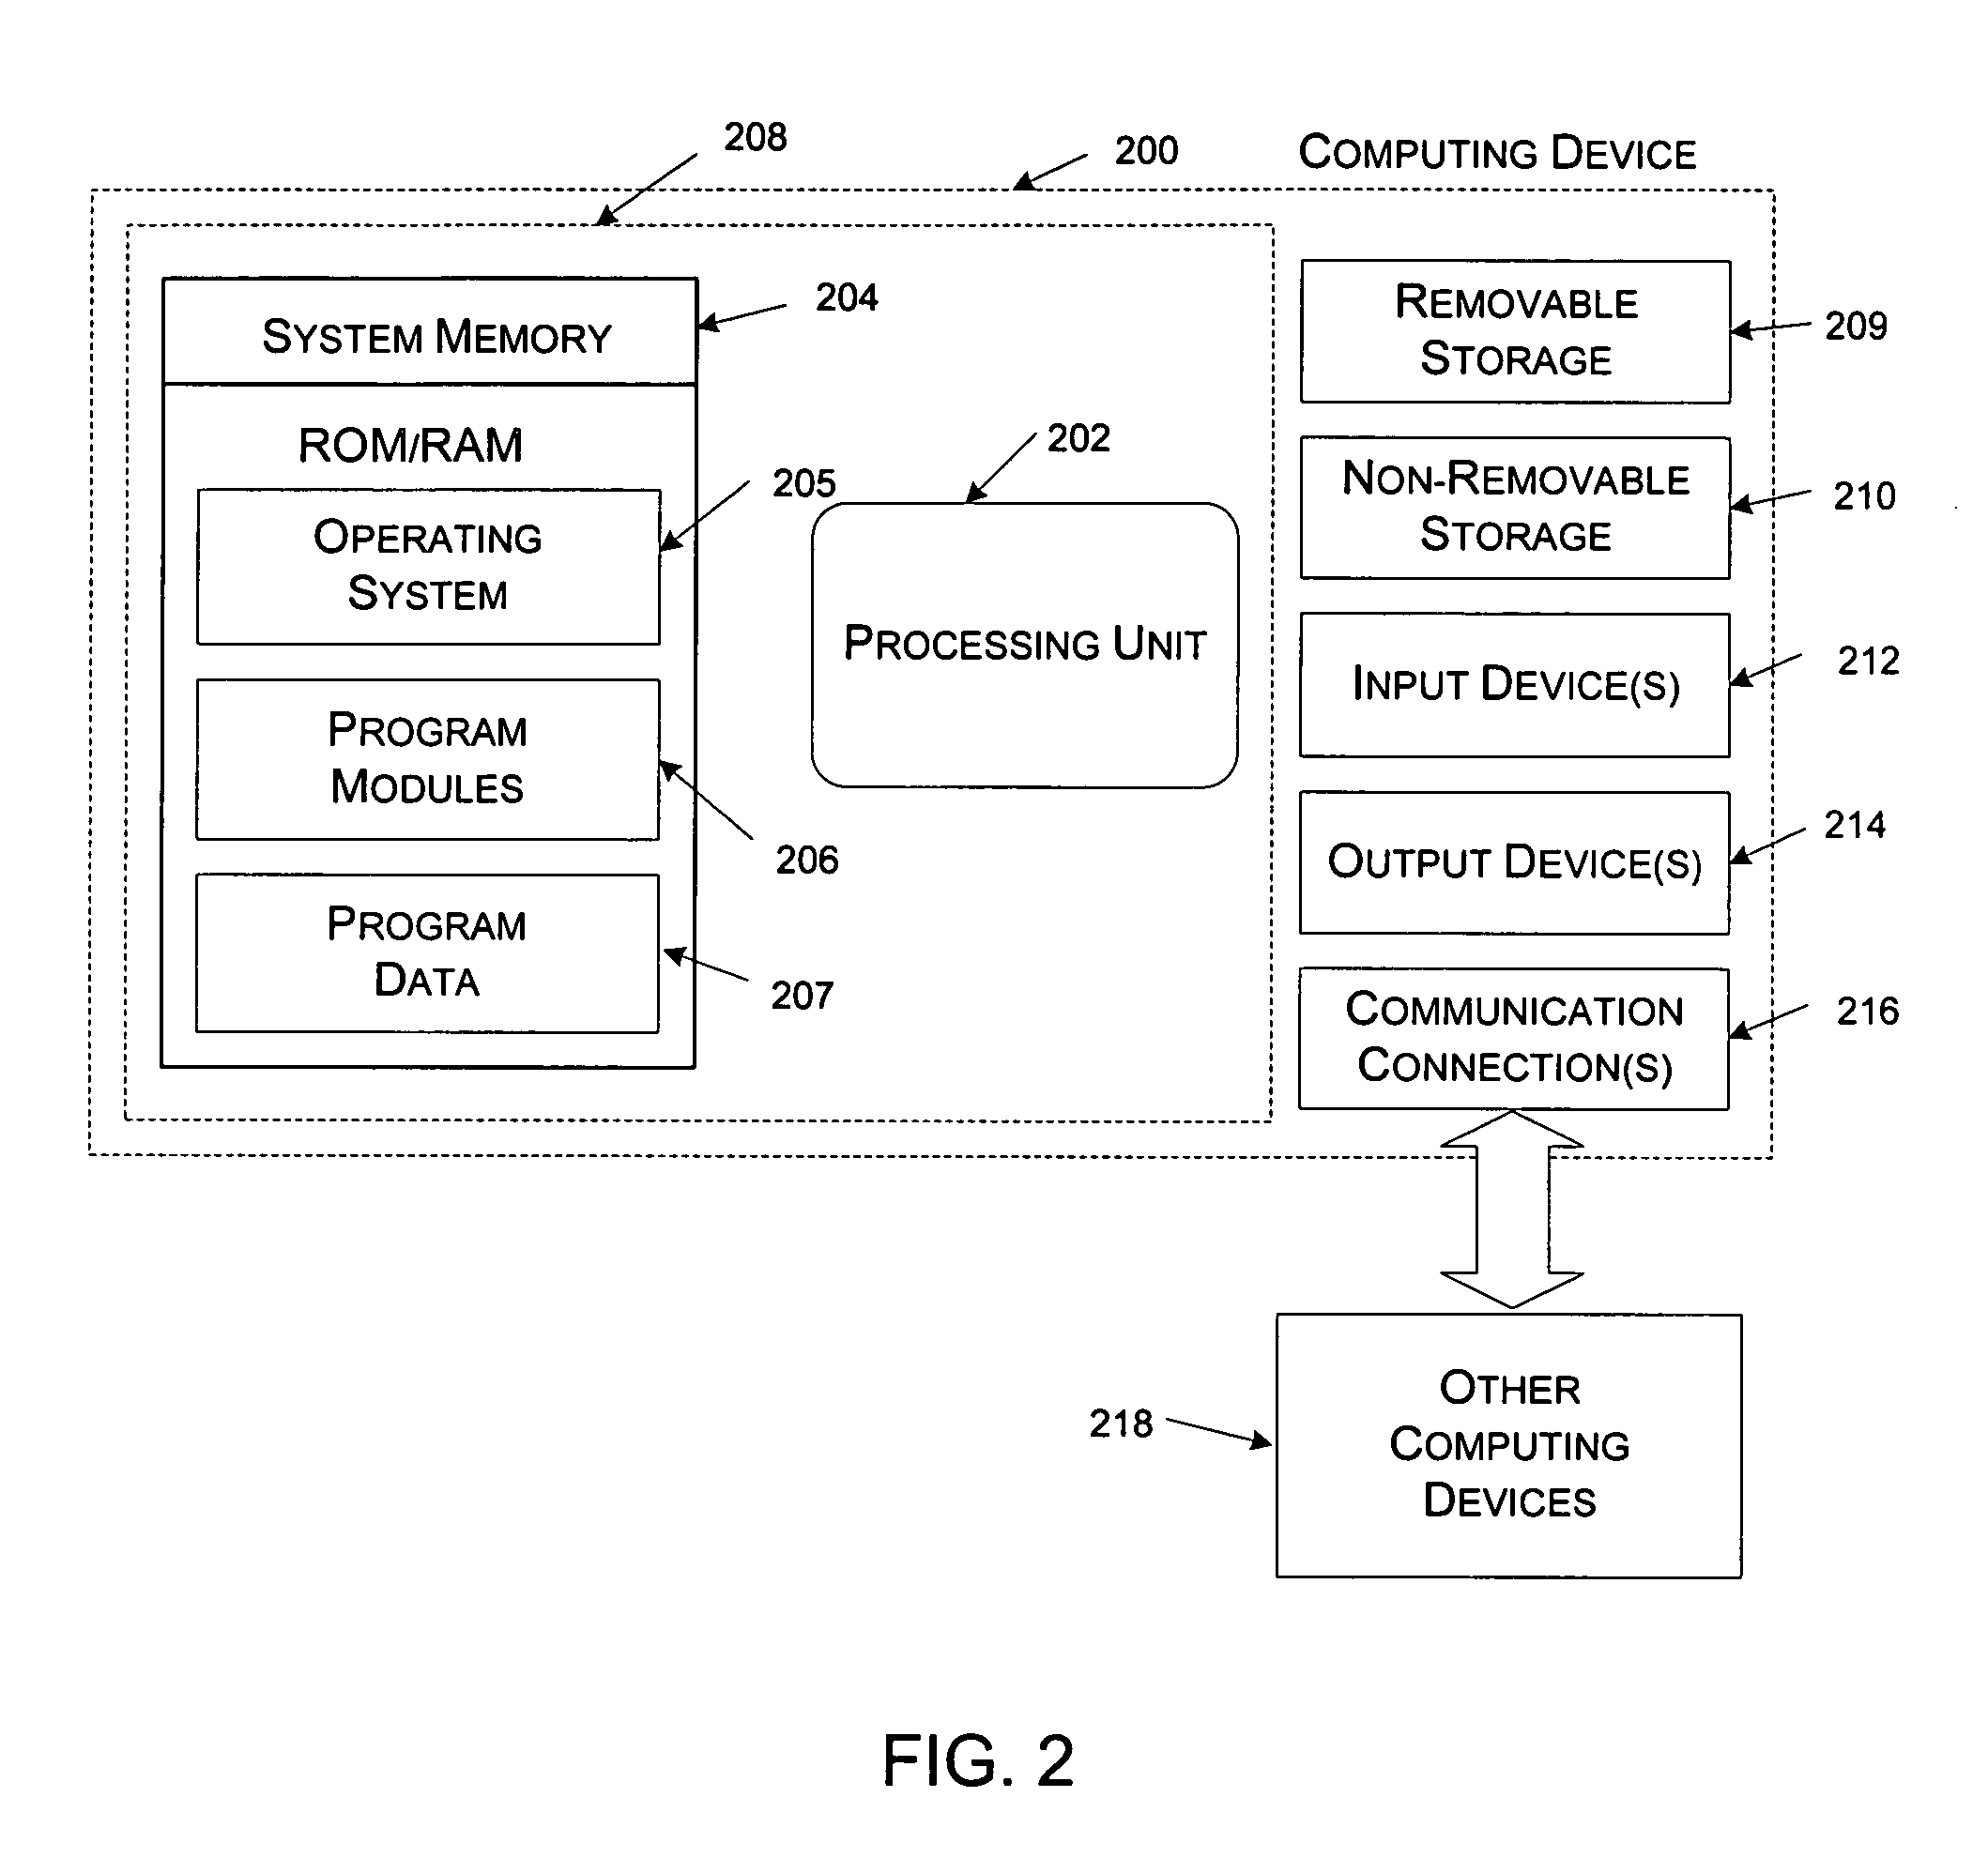 Efficient algorithm and protocol for remote differential compression on a remote device